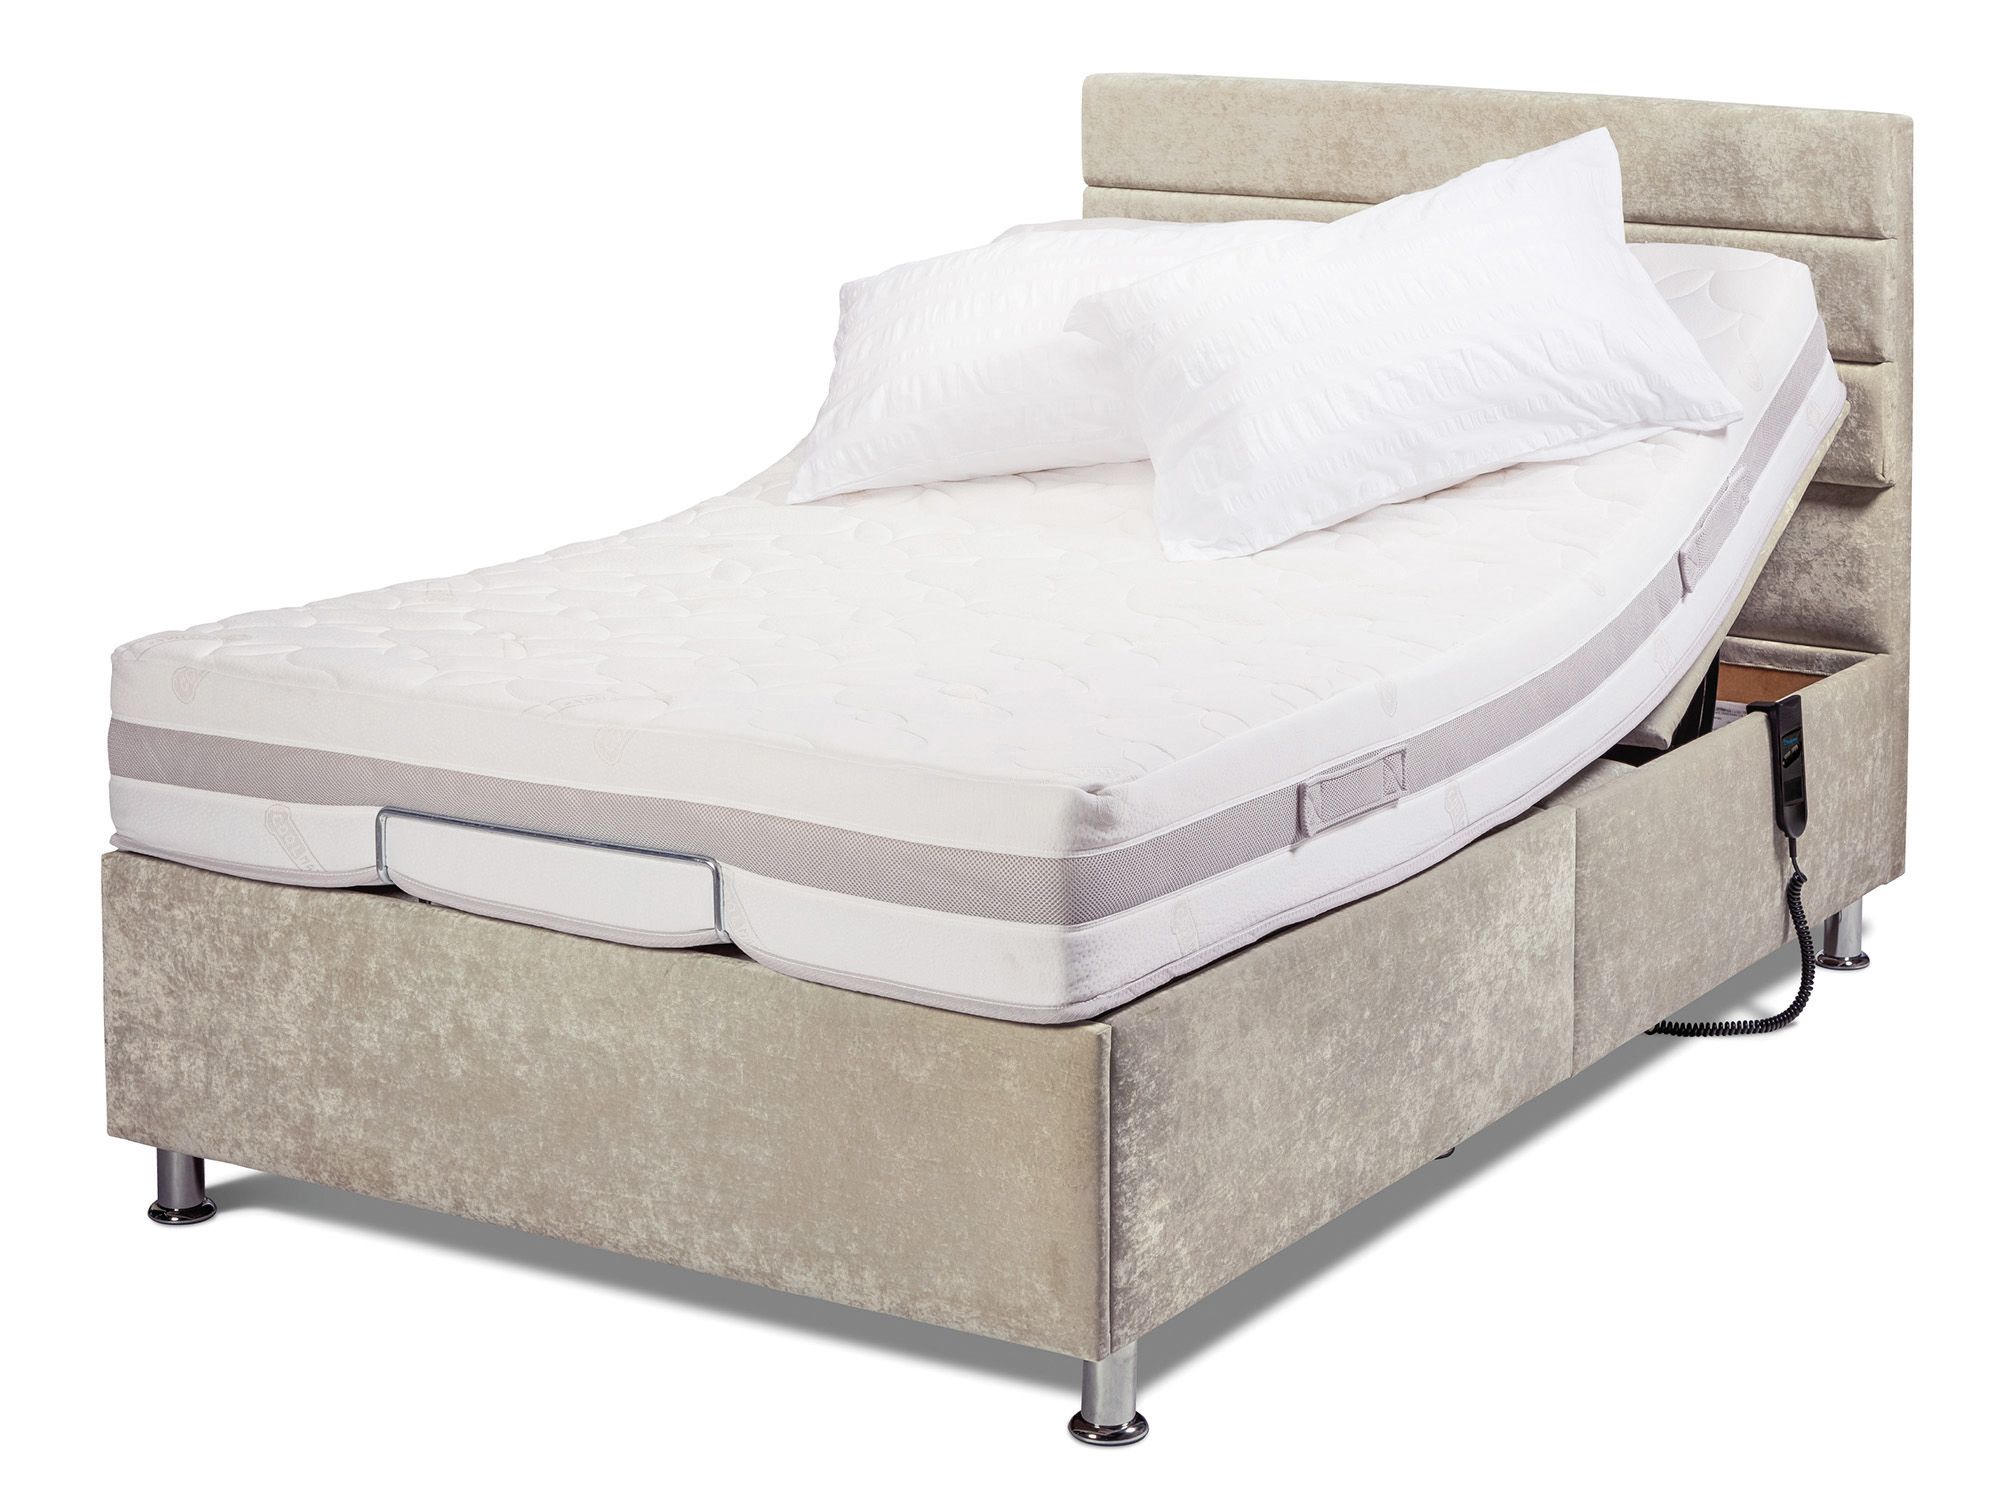 small double bed and mattress combo deals